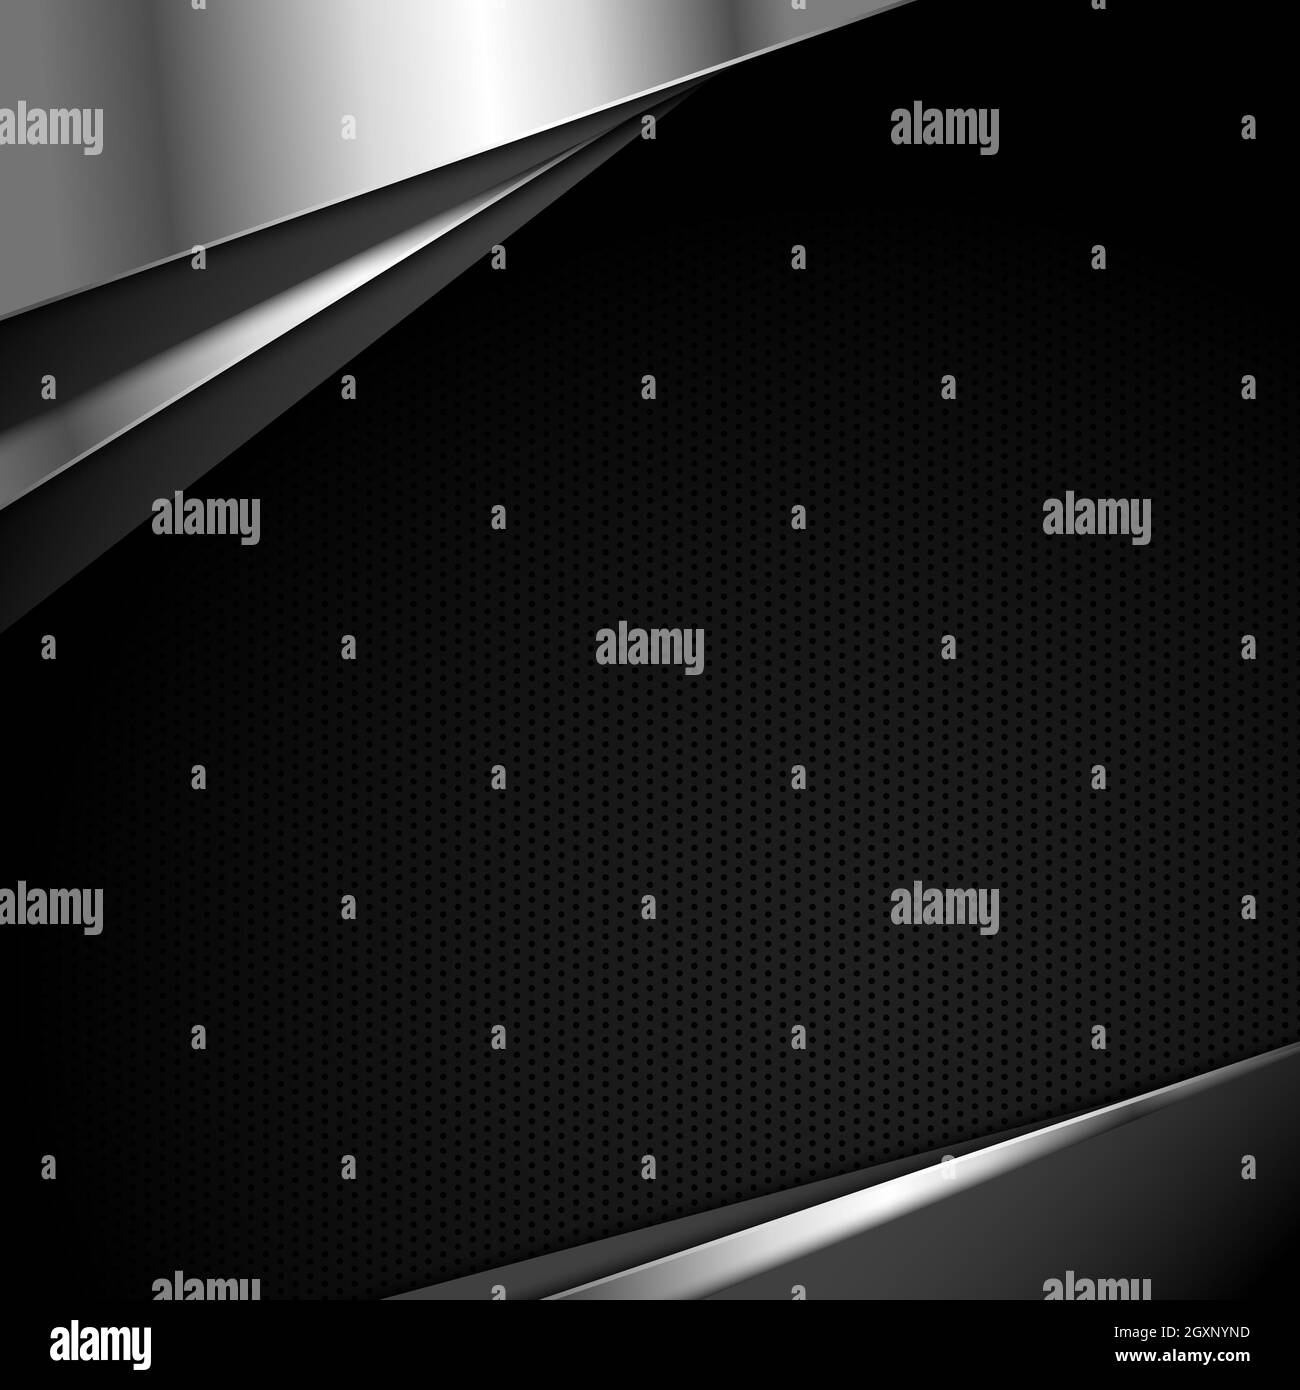 Perforated dark background with metal inserts - Vector illustration Stock Photo